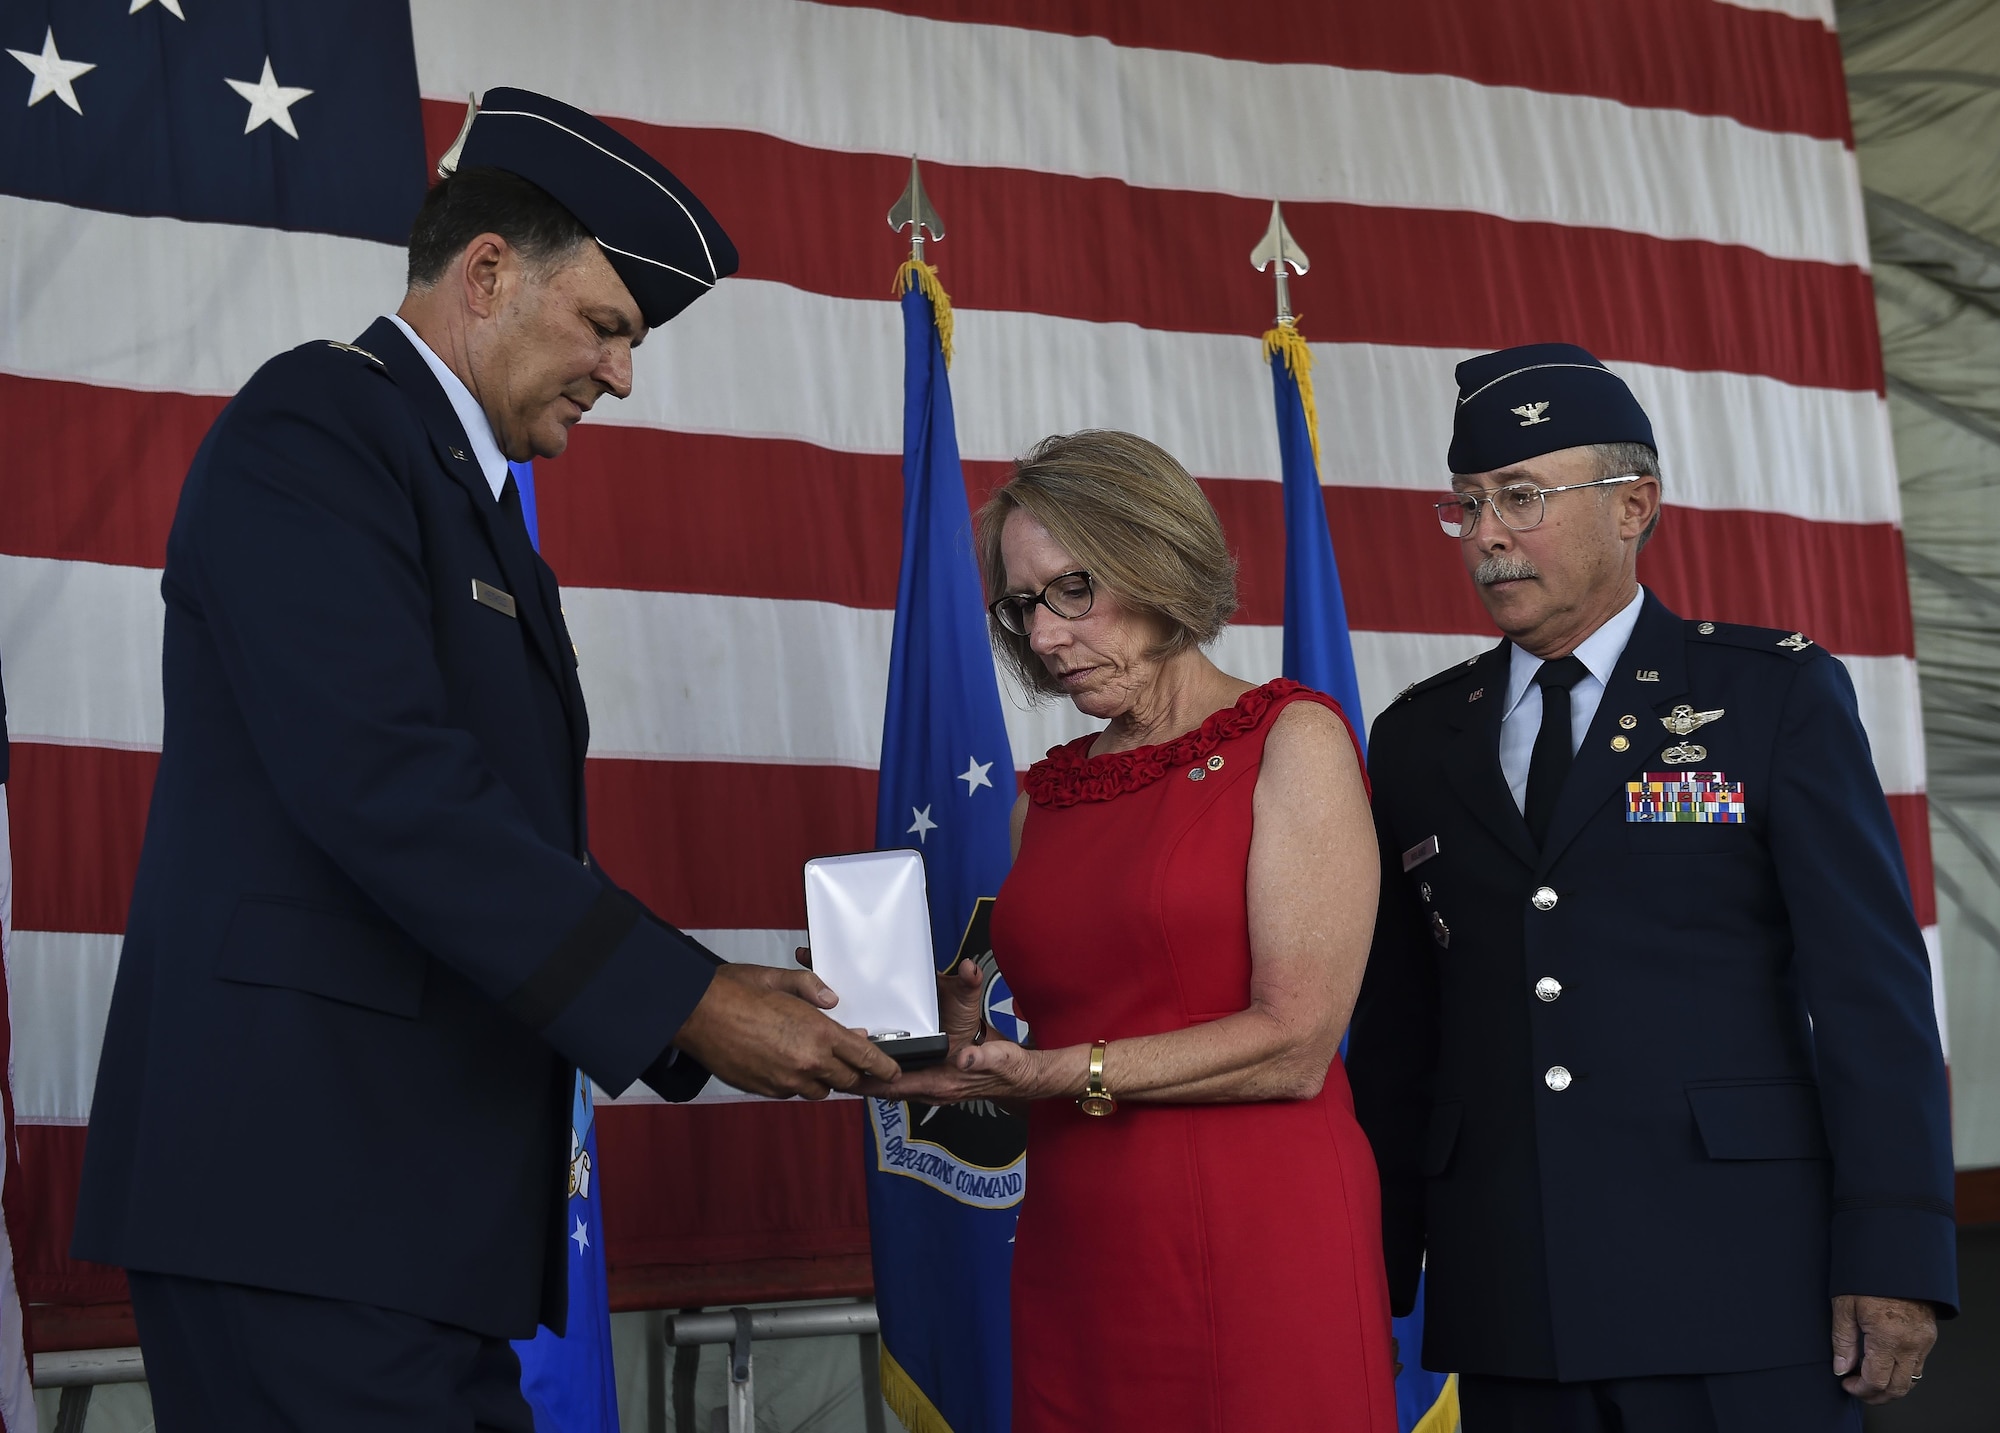 The family of Capt. Matthew D. Roland, a Special Tactics officer killed in action, was presented his posthumous Silver Star medal by Lt. Gen. Brad Heithold, commander of Air Force Special Operations Command, Hurlburt Field, Fla., June 1, 2016. Roland gave his last full measure to protect teammates during an ambush on his convoy at an Afghan-led security checkpoint near Camp Antonik, Afghanistan, Aug. 26, 2015. The Silver Star medal is the nation's third-highest valorous combat decoration.  (U.S. Air Force photo by Senior Airman Ryan Conroy/Released)